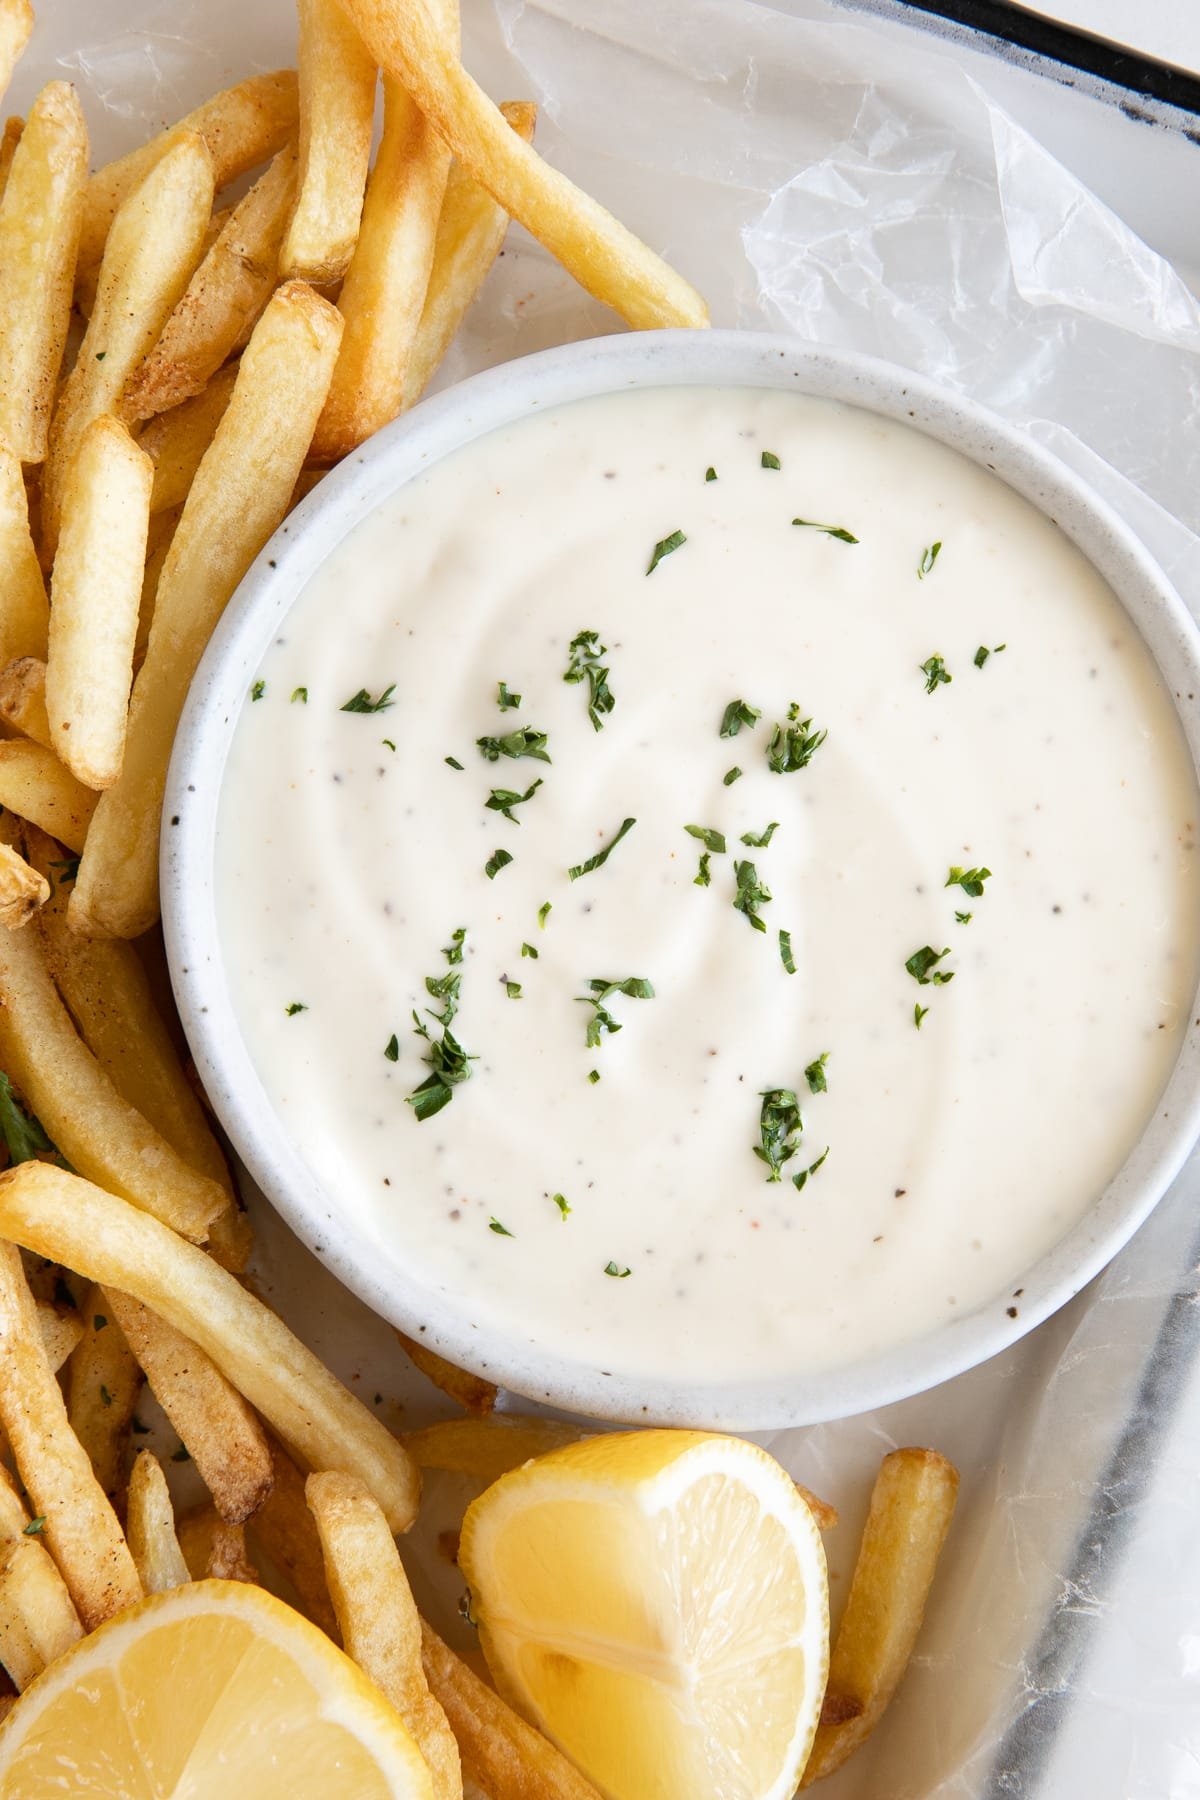 Over head image of a small round shallow bowl filled with creamy garlic aioli garnished with fresh parsley.